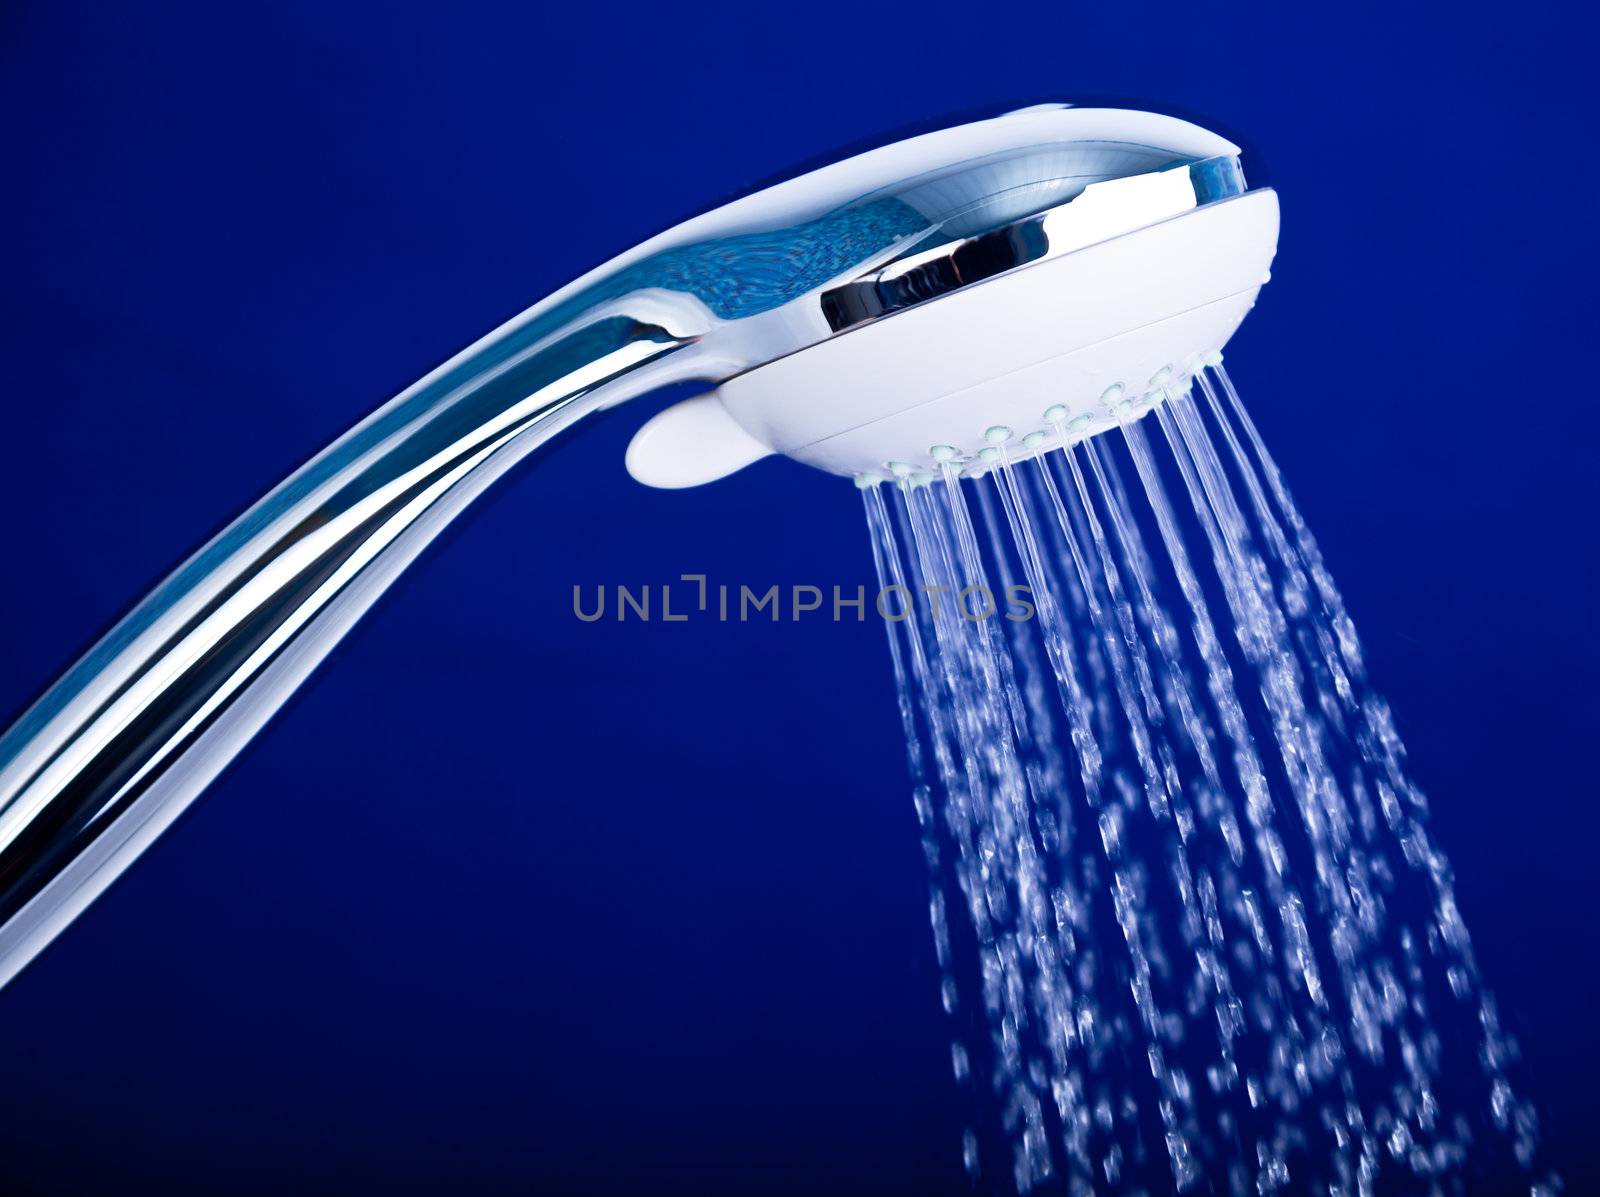 Shower head with running water against blue background